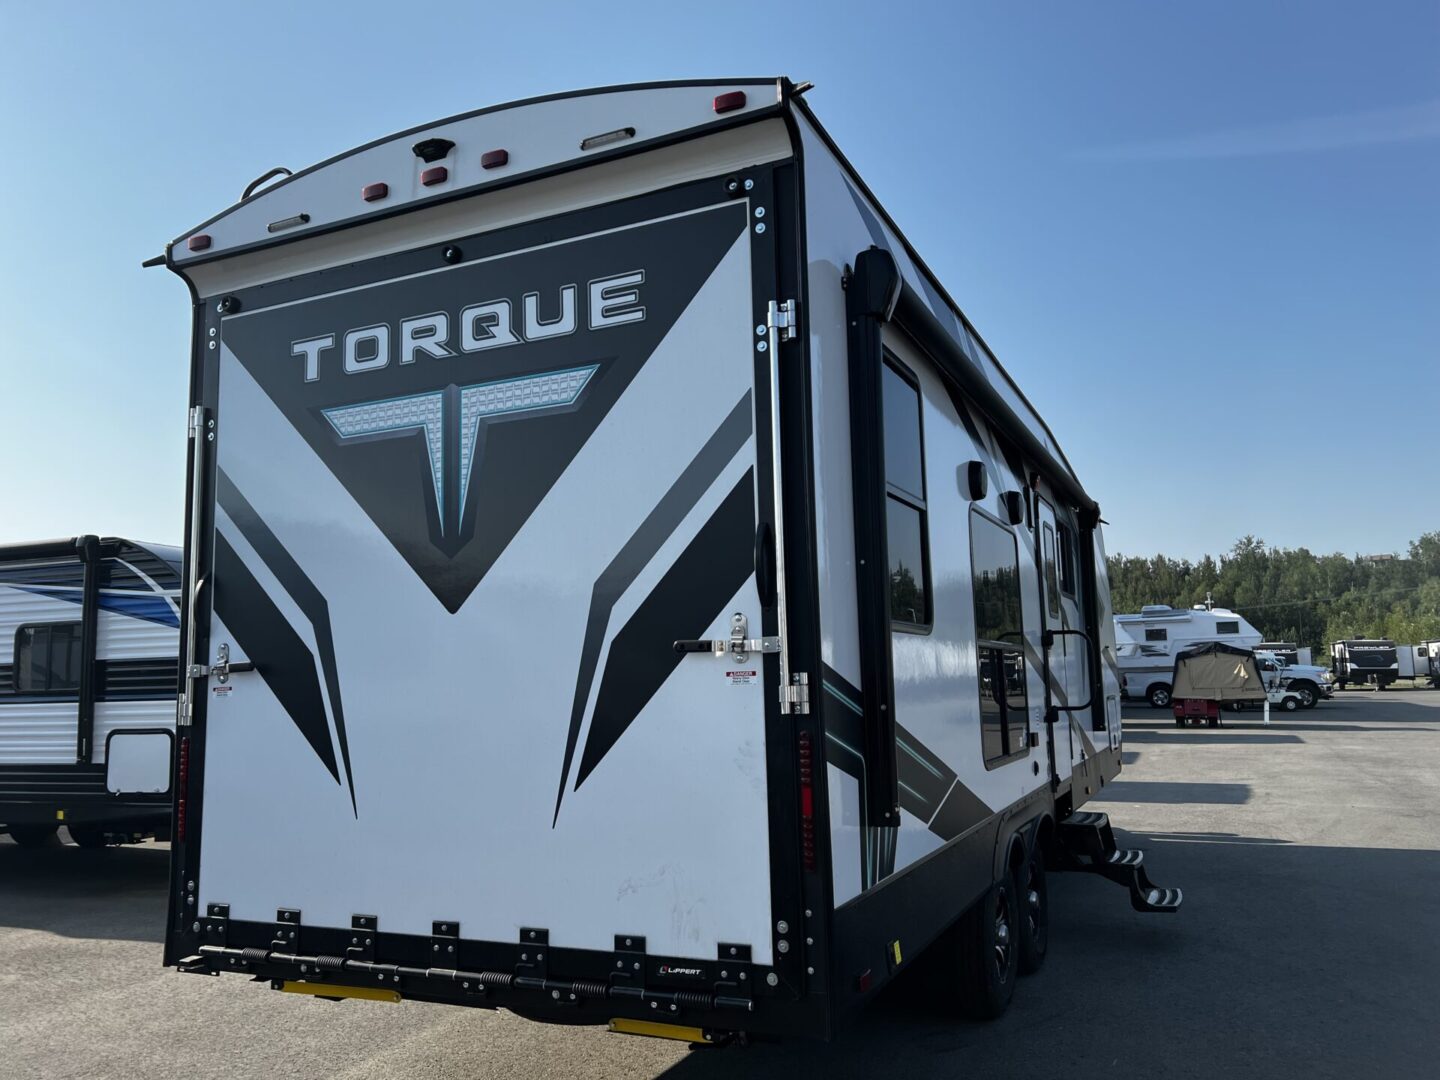 The backside view of the Torque Travel Trailer